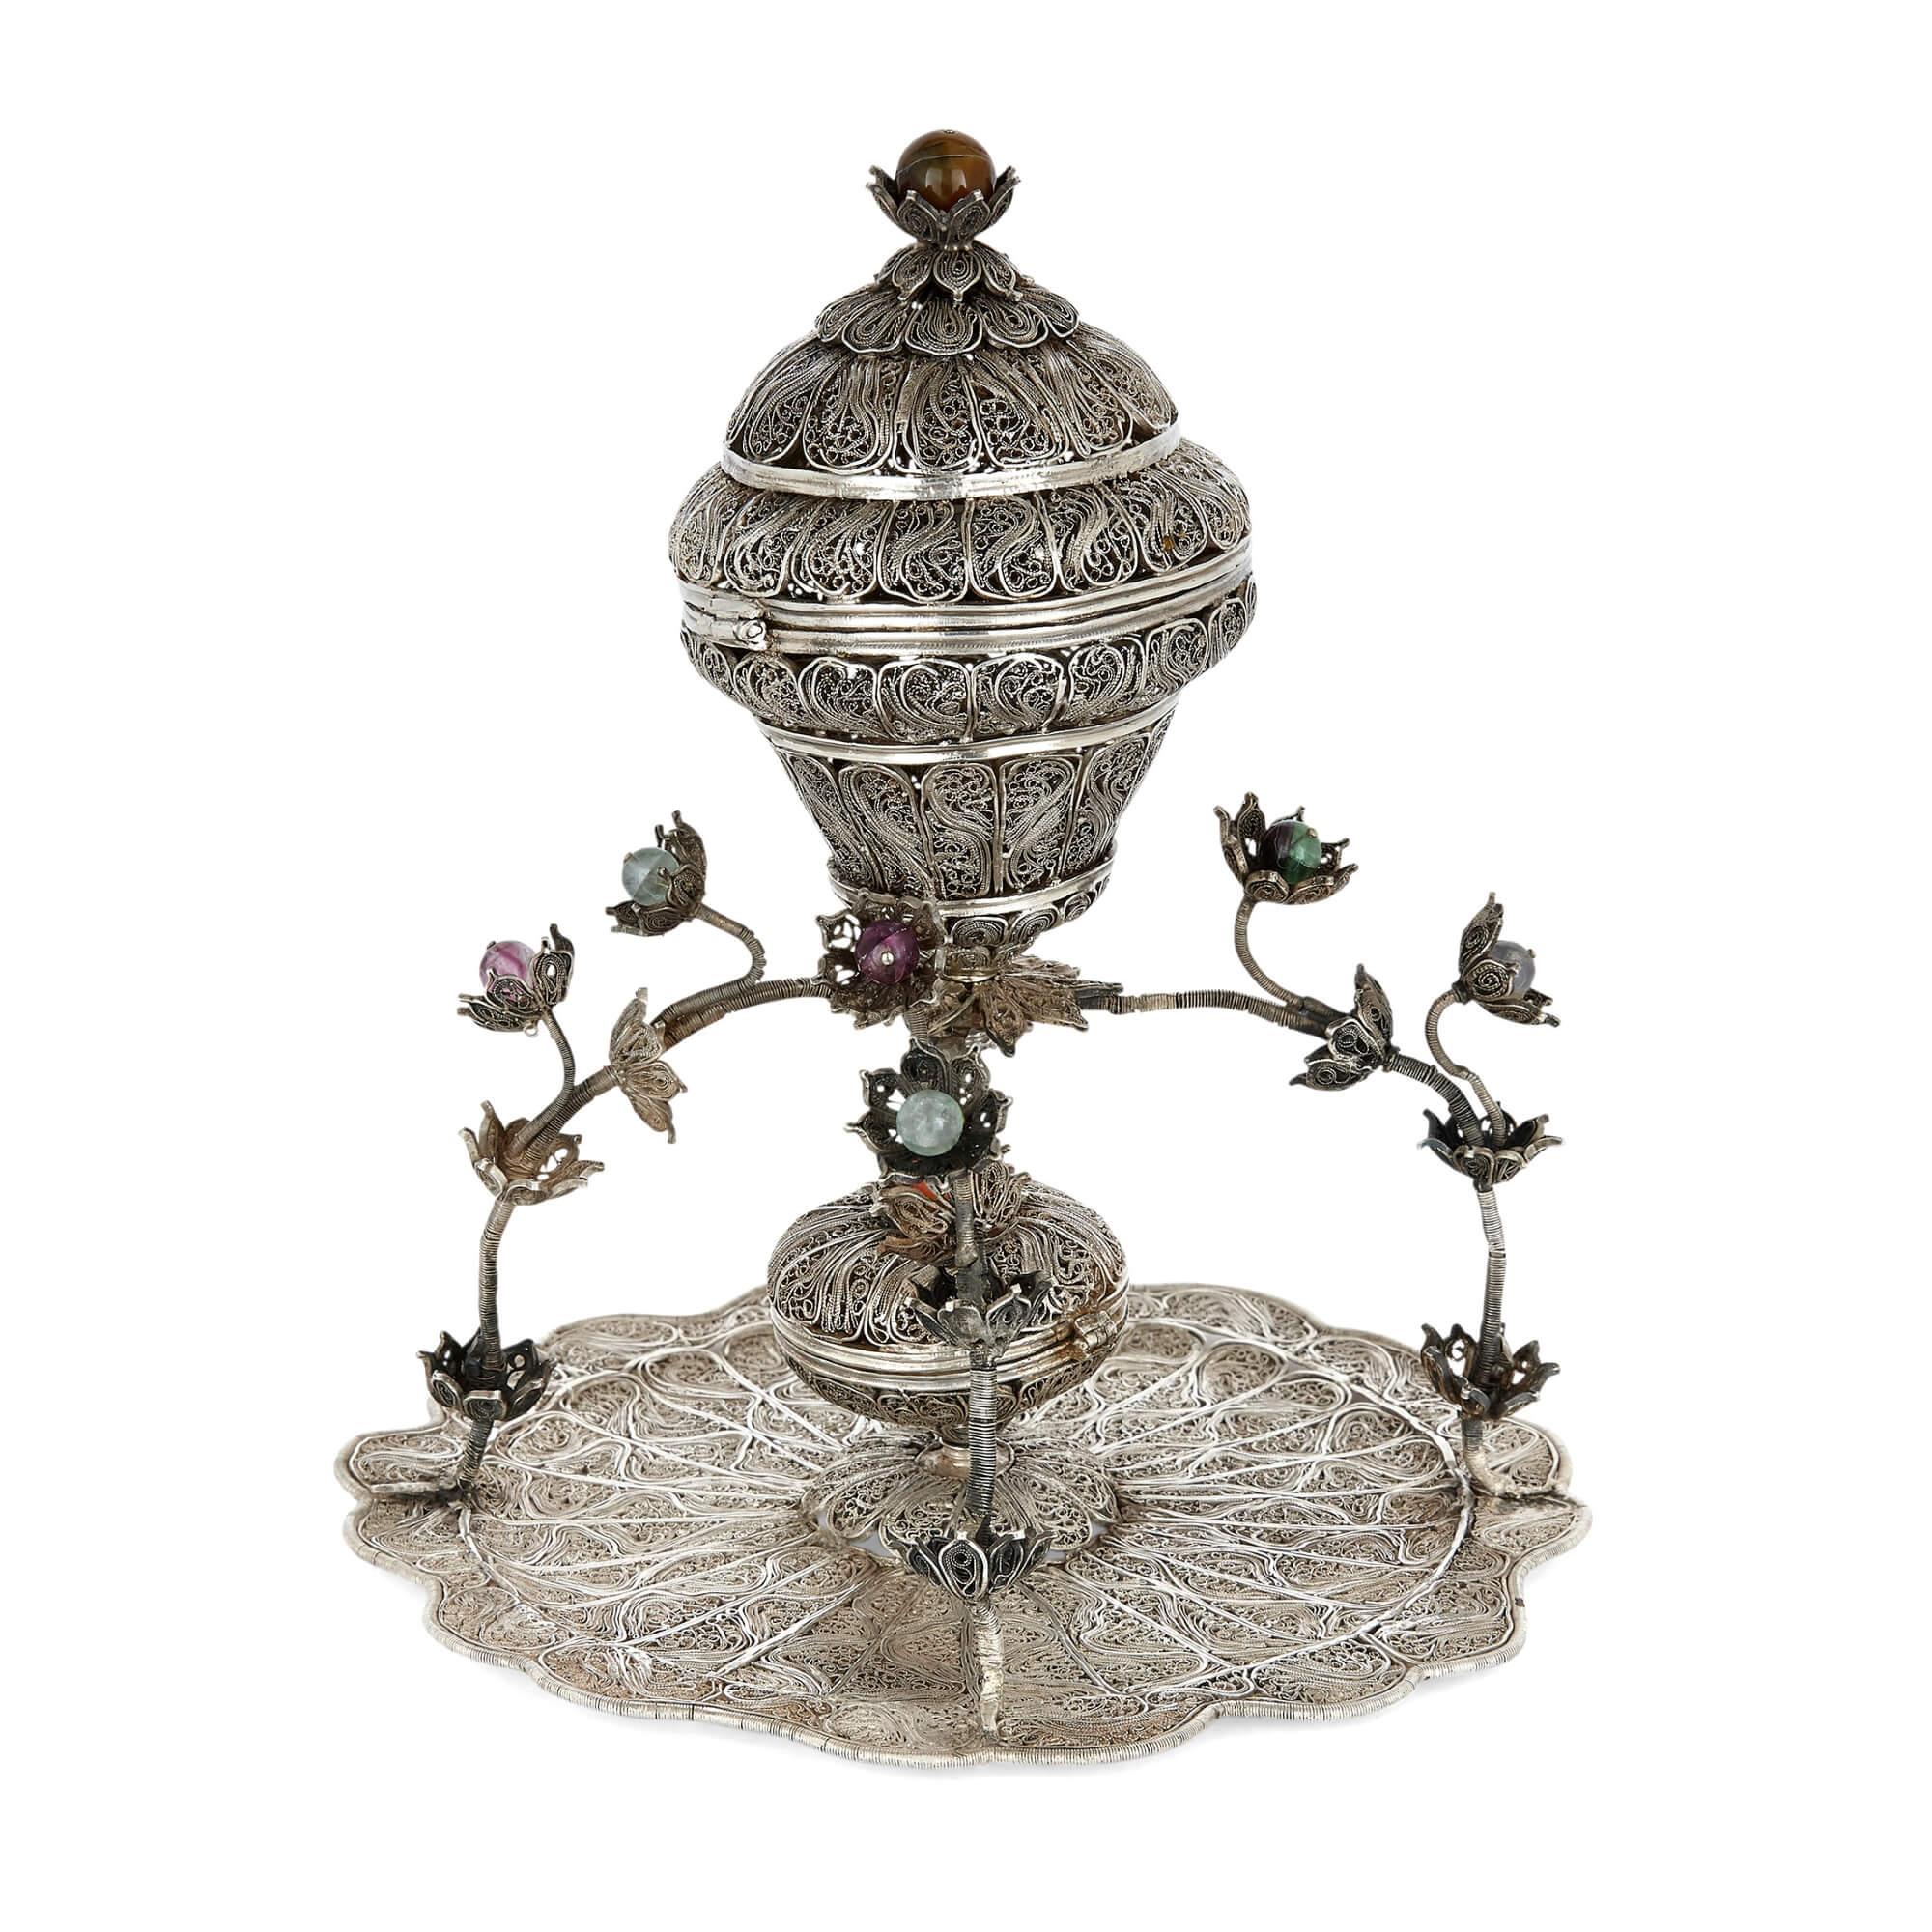 Ottoman filigreed silver and hardstone sweets dish
Turkish, 19th century
Height 24cm, diameter 21cm

This beautiful, filigreed silver item is an Ottoman sweets dish. The piece features a filigree bowl with a hinged and domed lid, supported by